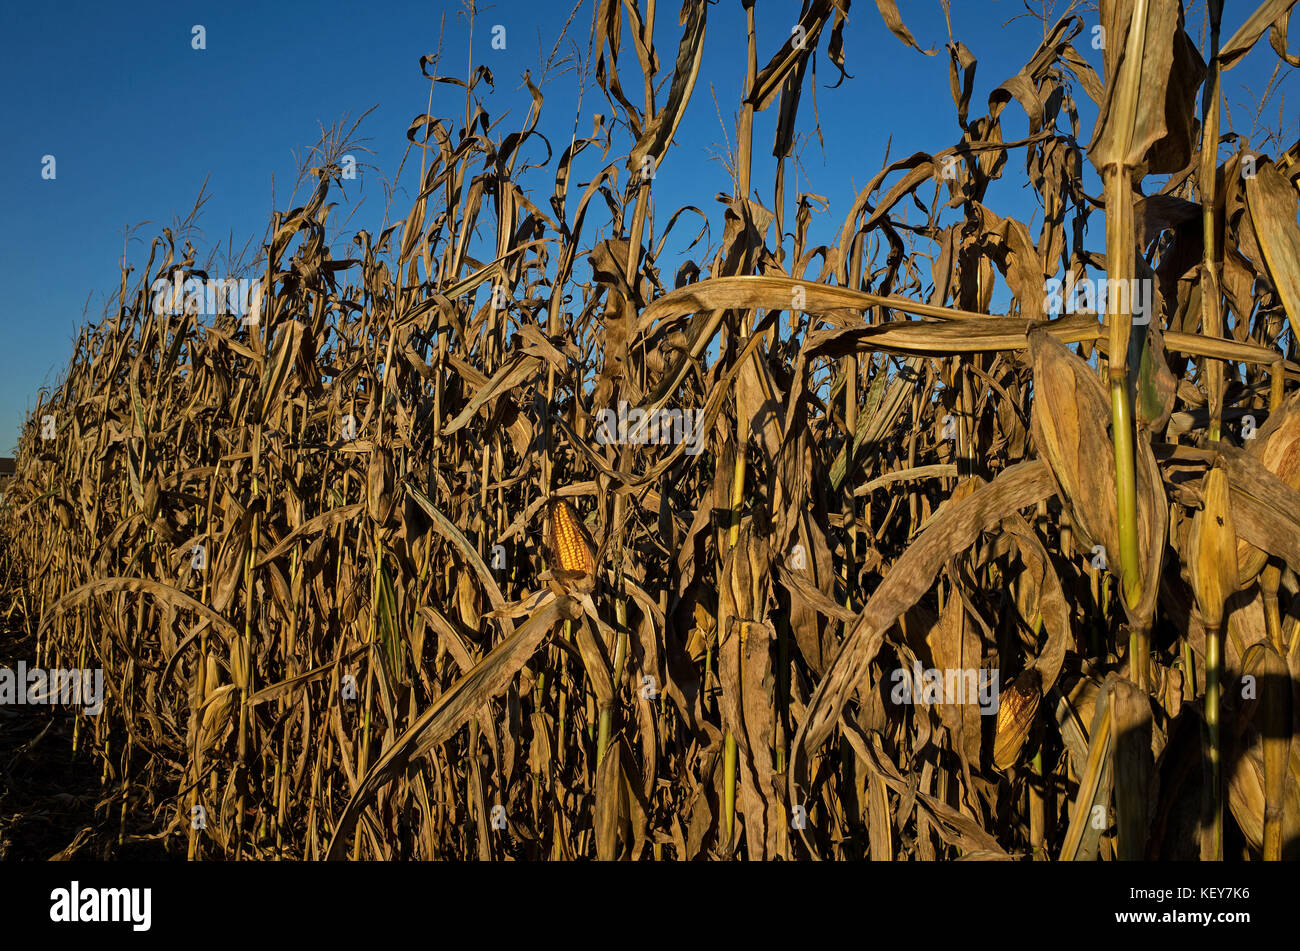 Field corn ready for harvest in the late day golden sun of a bright and sunny October day. Stock Photo